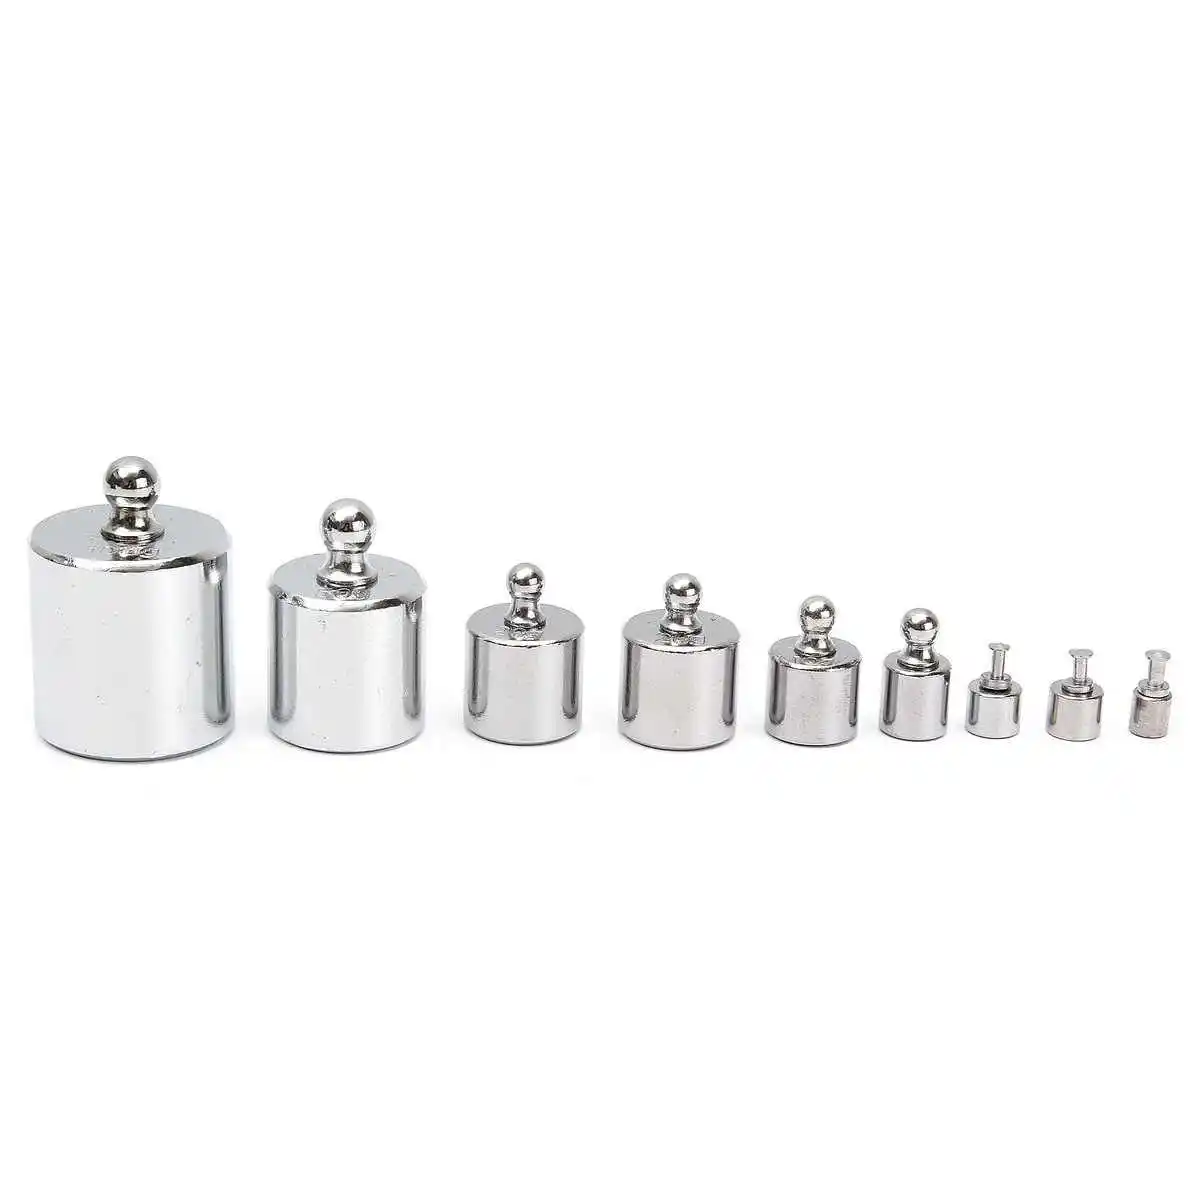 17Pcs 211.1g 10mg-100g Grams Precision Calibration Weight Set Test Jewelry Scale Weight Test Scale Set,Steel Scale Weight 